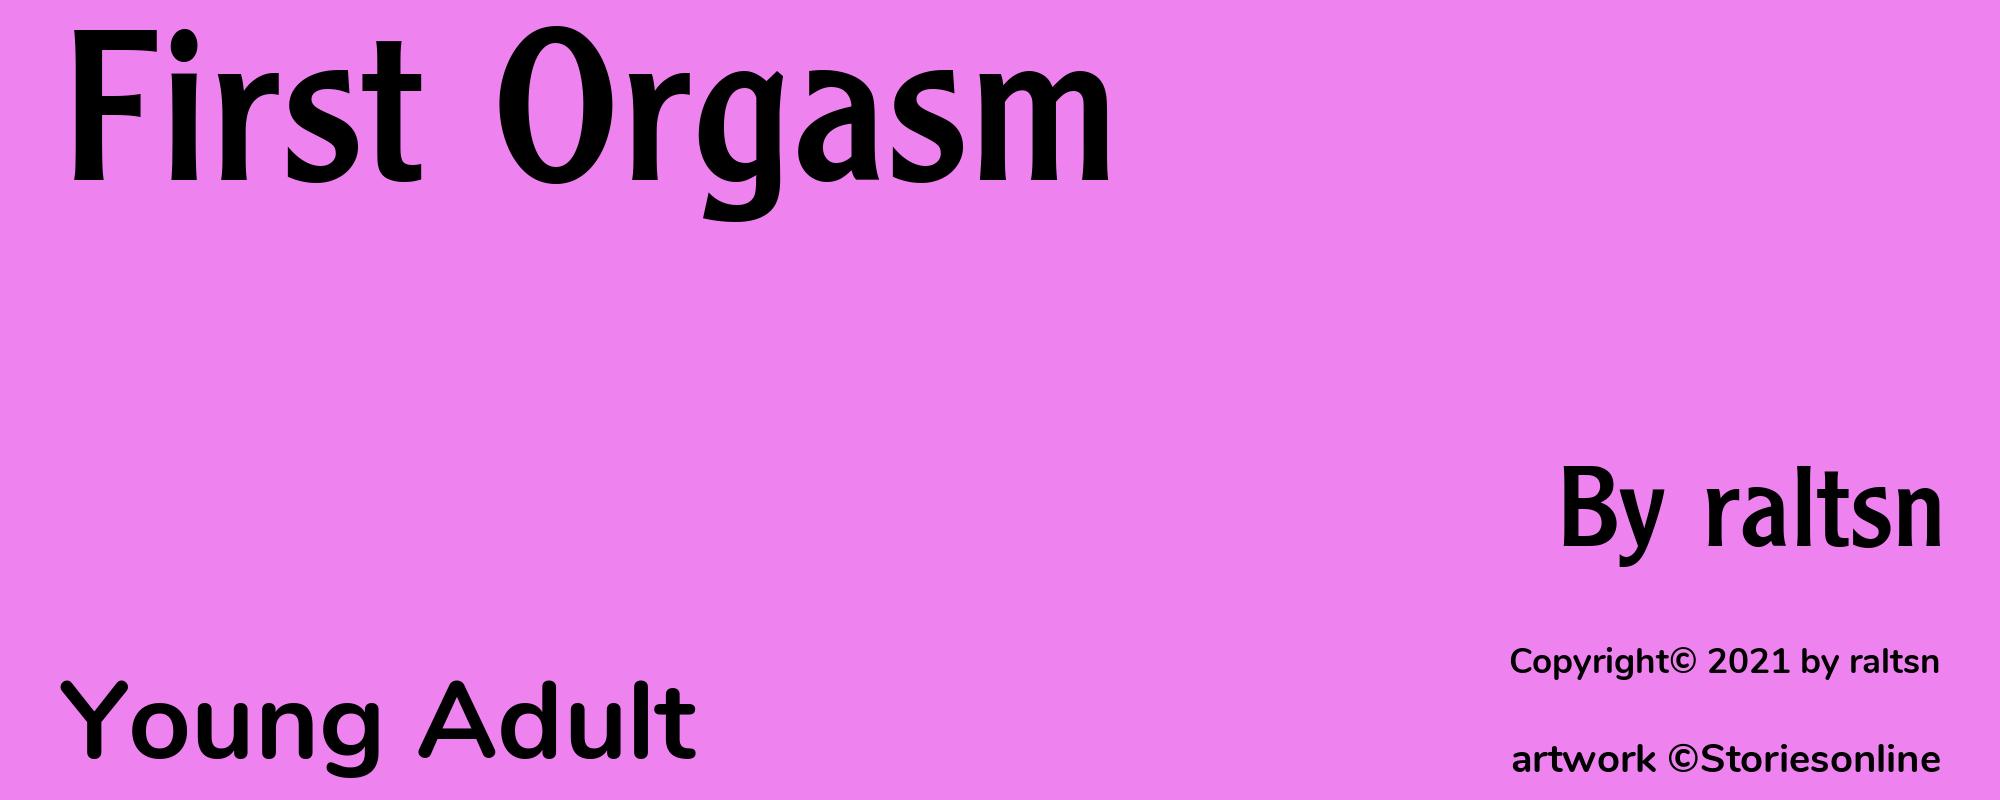 First Orgasm - Cover